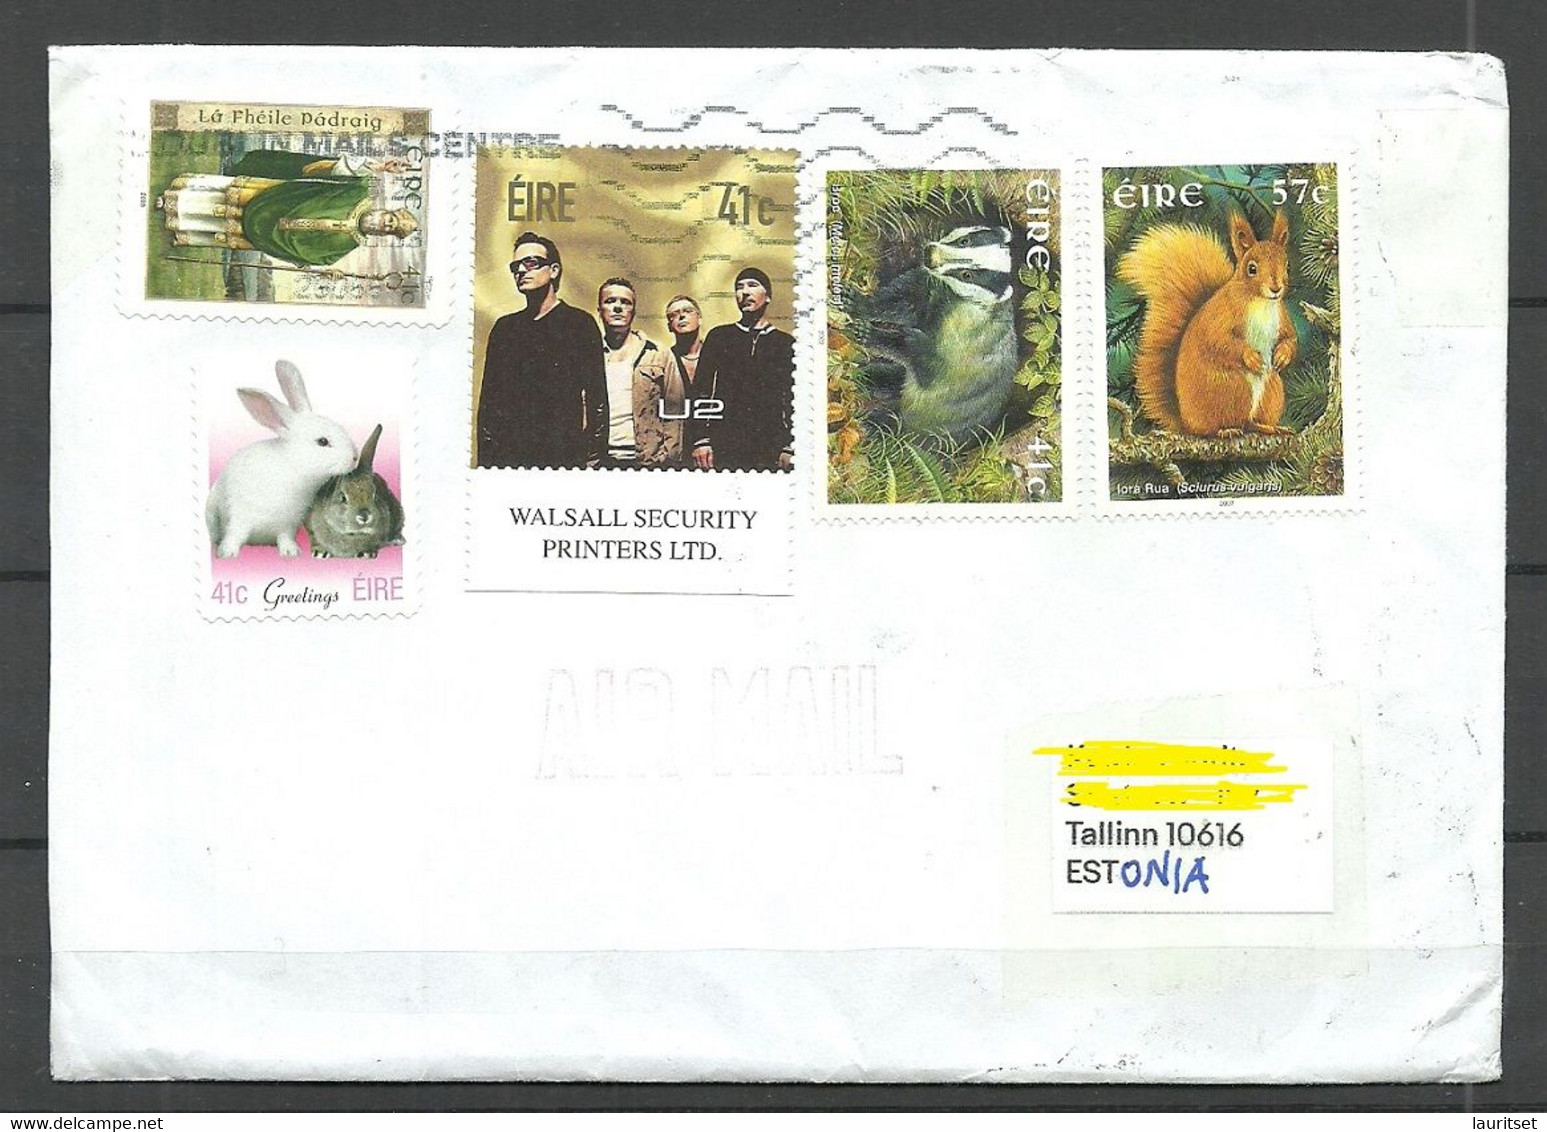 IRLAND IRELAND 2022 Cover To Estonia With Many Nice Stamps Animals Tiere Musik Band U2 Bono Etc - Covers & Documents